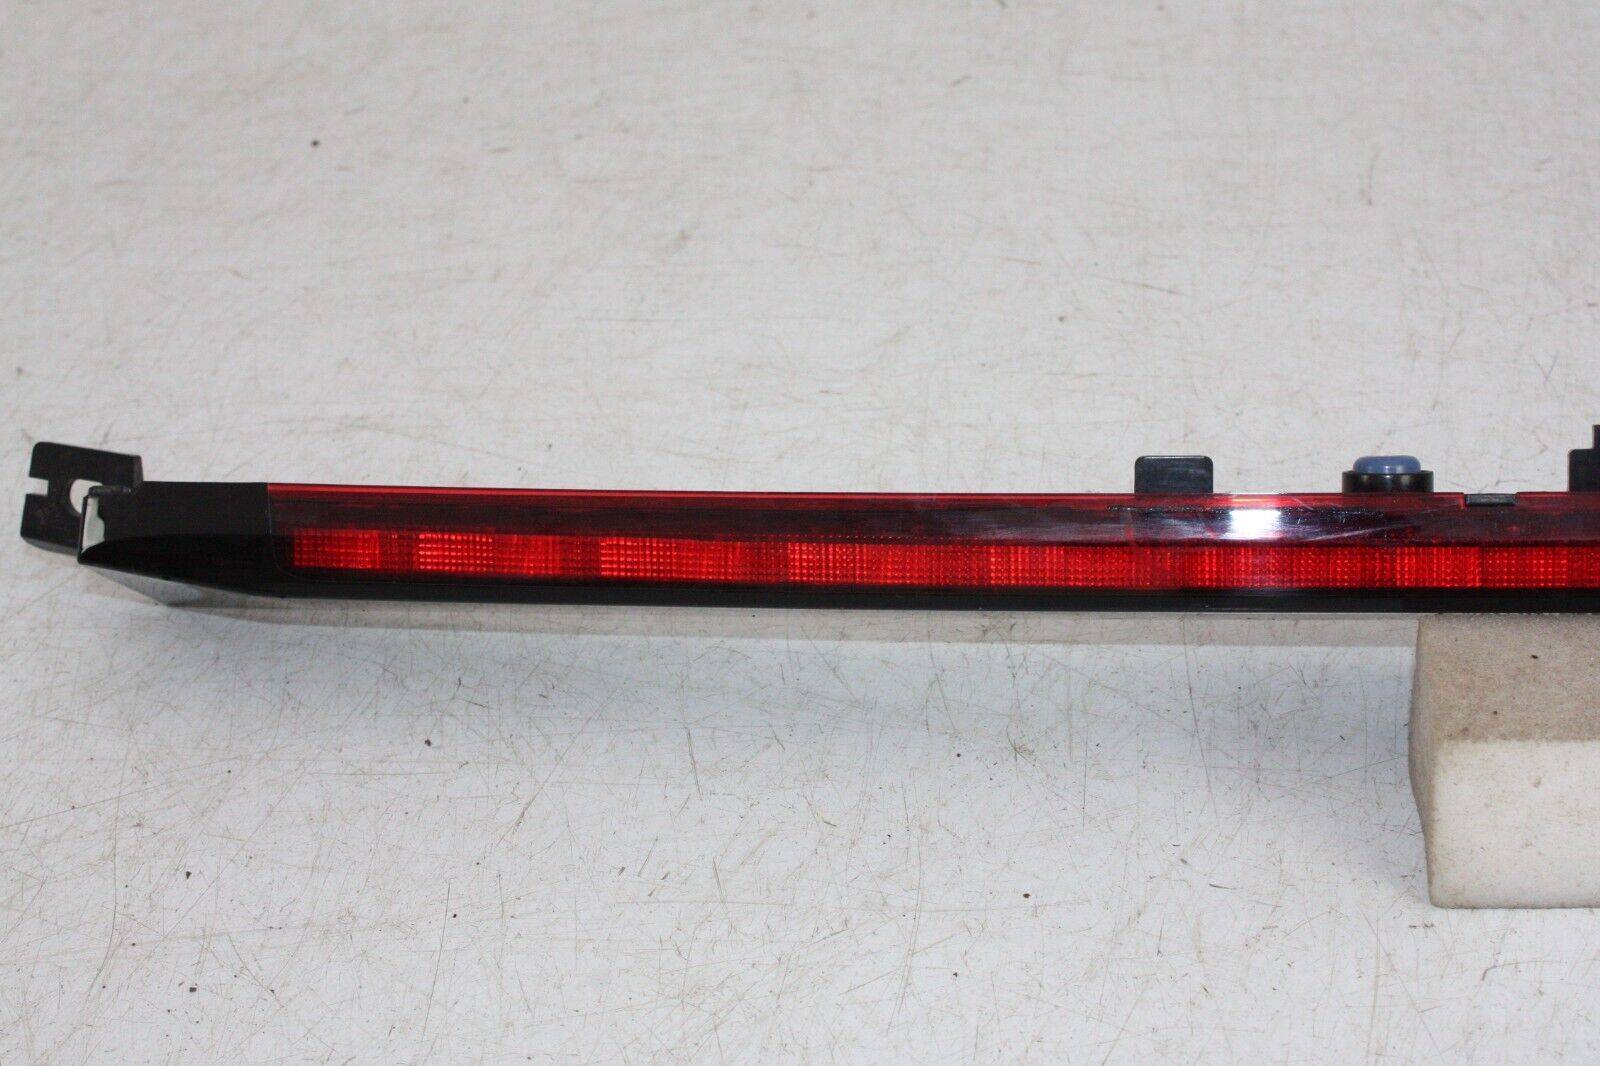 VOLVO-XC90-REAR-HIGH-MOUNT-TAILGATE-STOP-LAMP-LIGHT-2015-ON-31353169-175429934723-2